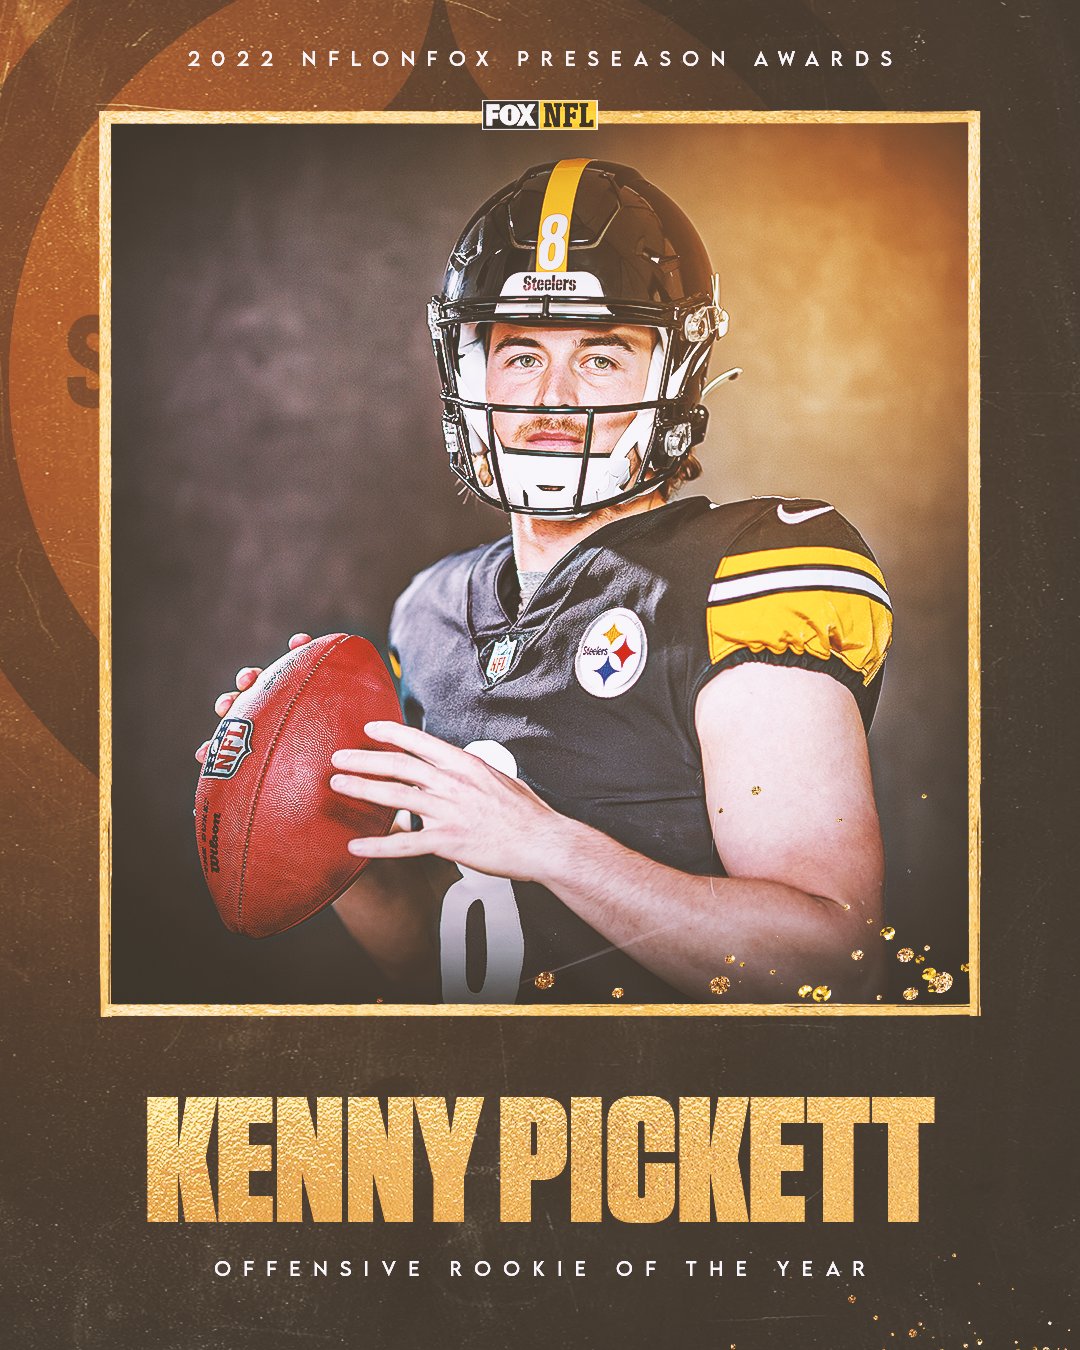 FOX Sports: NFL on X: 'The projected 2022 Offensive Rookie of the year is @ steelers QB @kennypickett10, as voted on by the NFL on FOX fans!   / X